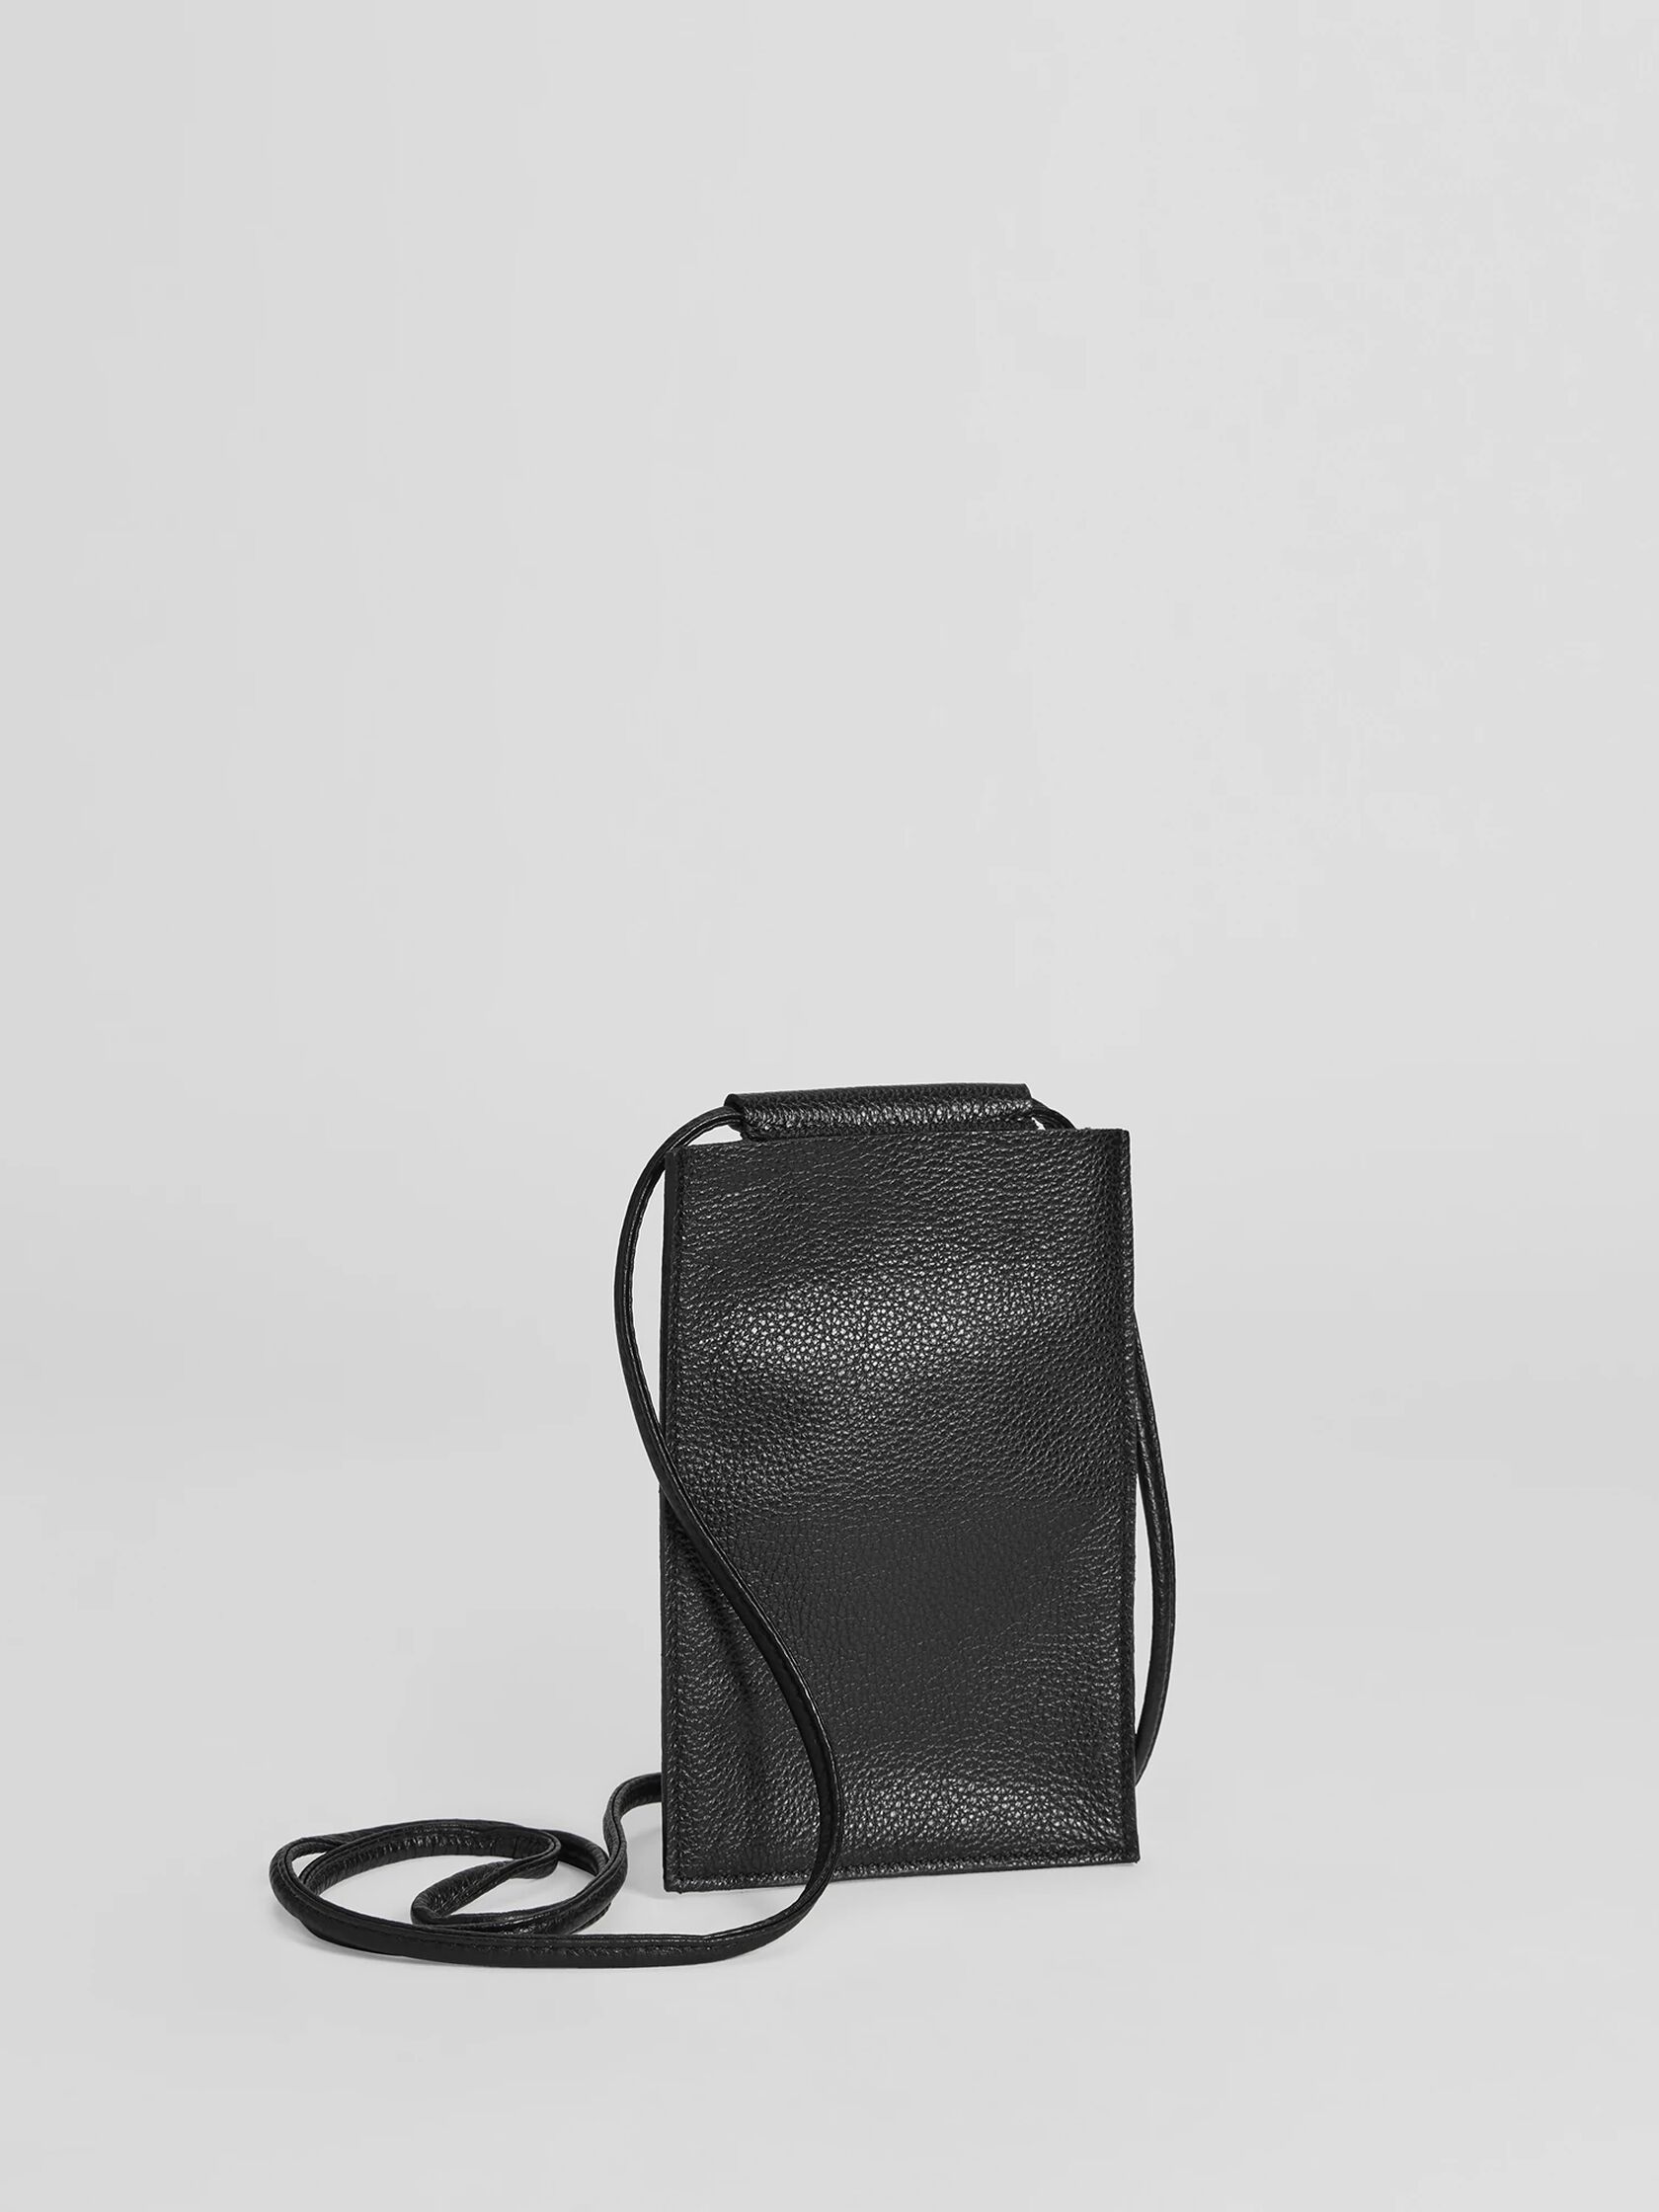 Textured Italian Leather Phone Pouch | EILEEN FISHER